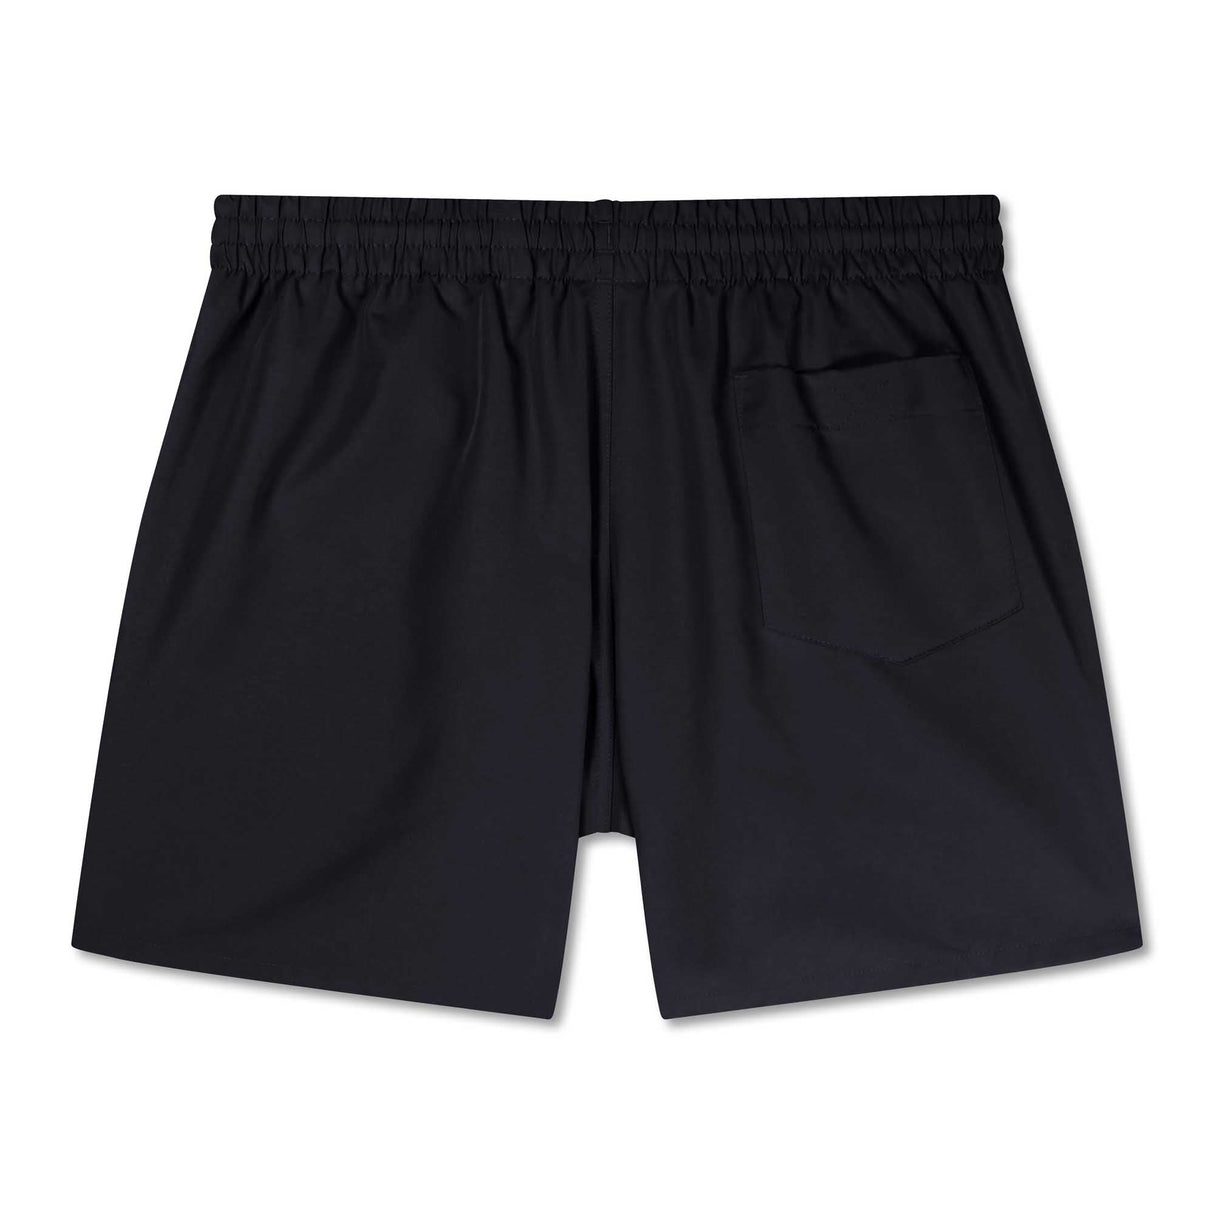 Canterbury Women's Uglies Tactic Short - Black |Womens Shorts | Canterbury | Absolute Rugby